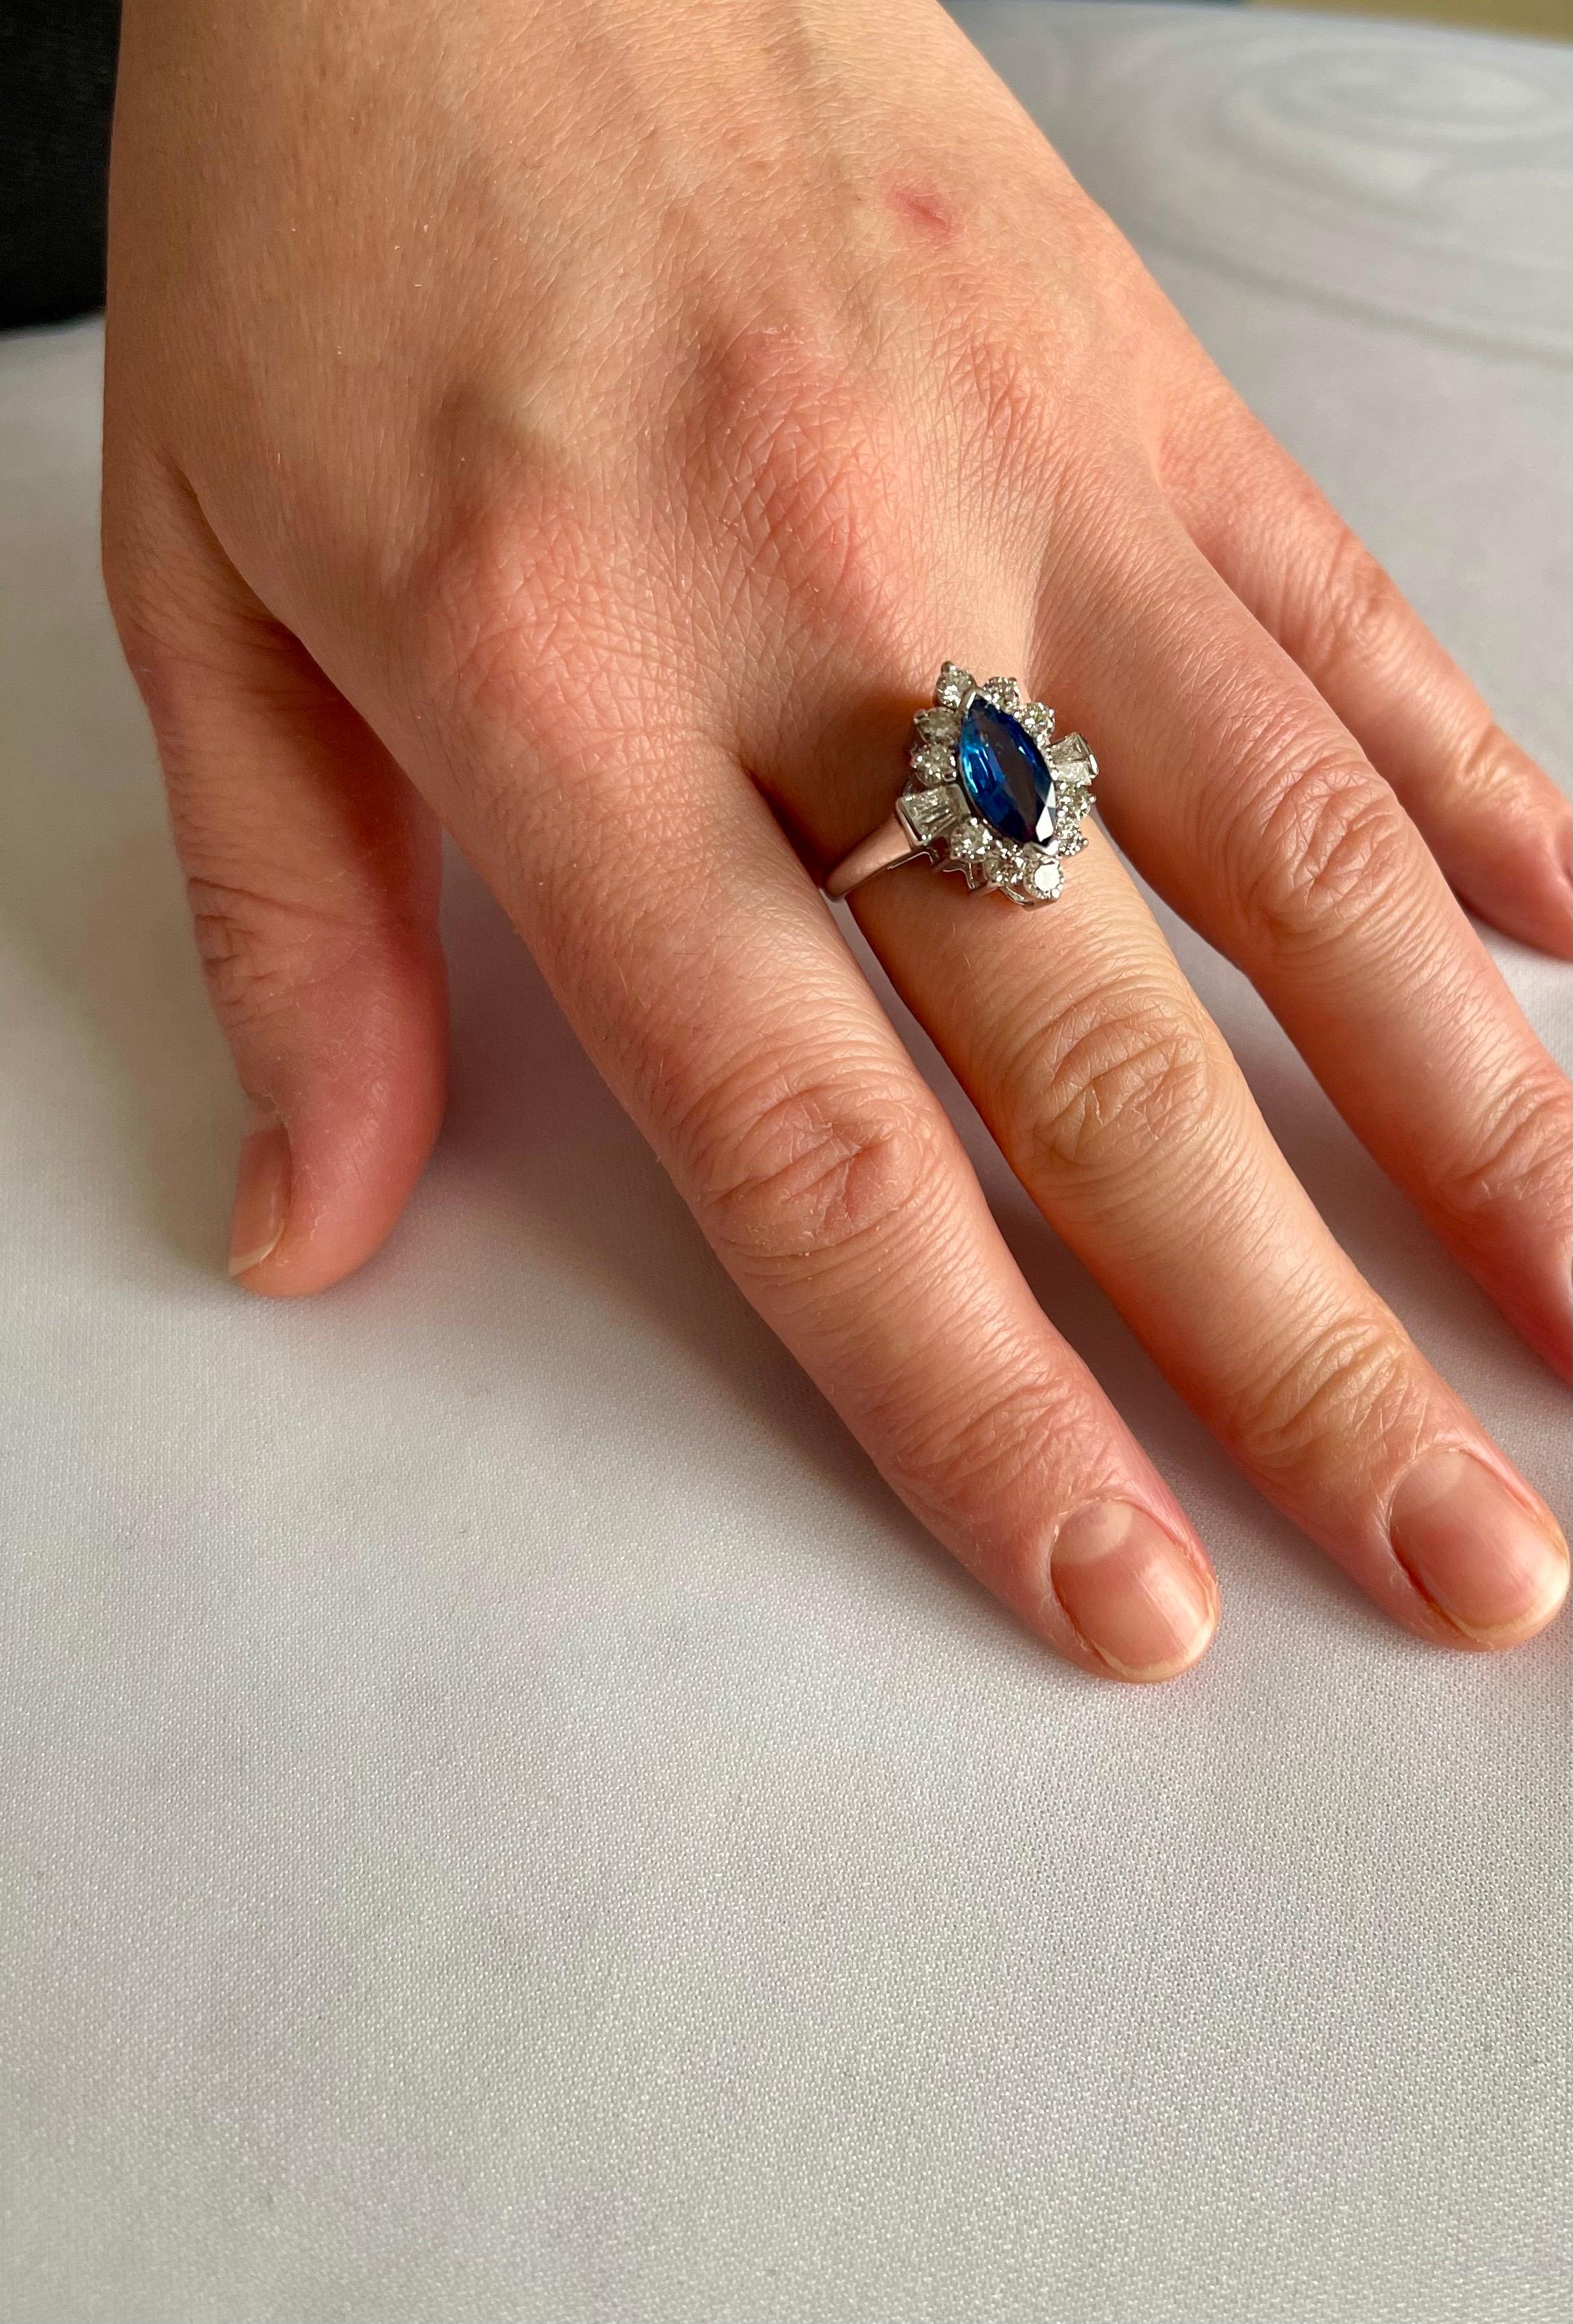 2.5 Ct Blue Sapphire & 1.2Ct Diamond Cocktail Ring in 18 Karat White Gold Estate For Sale 4